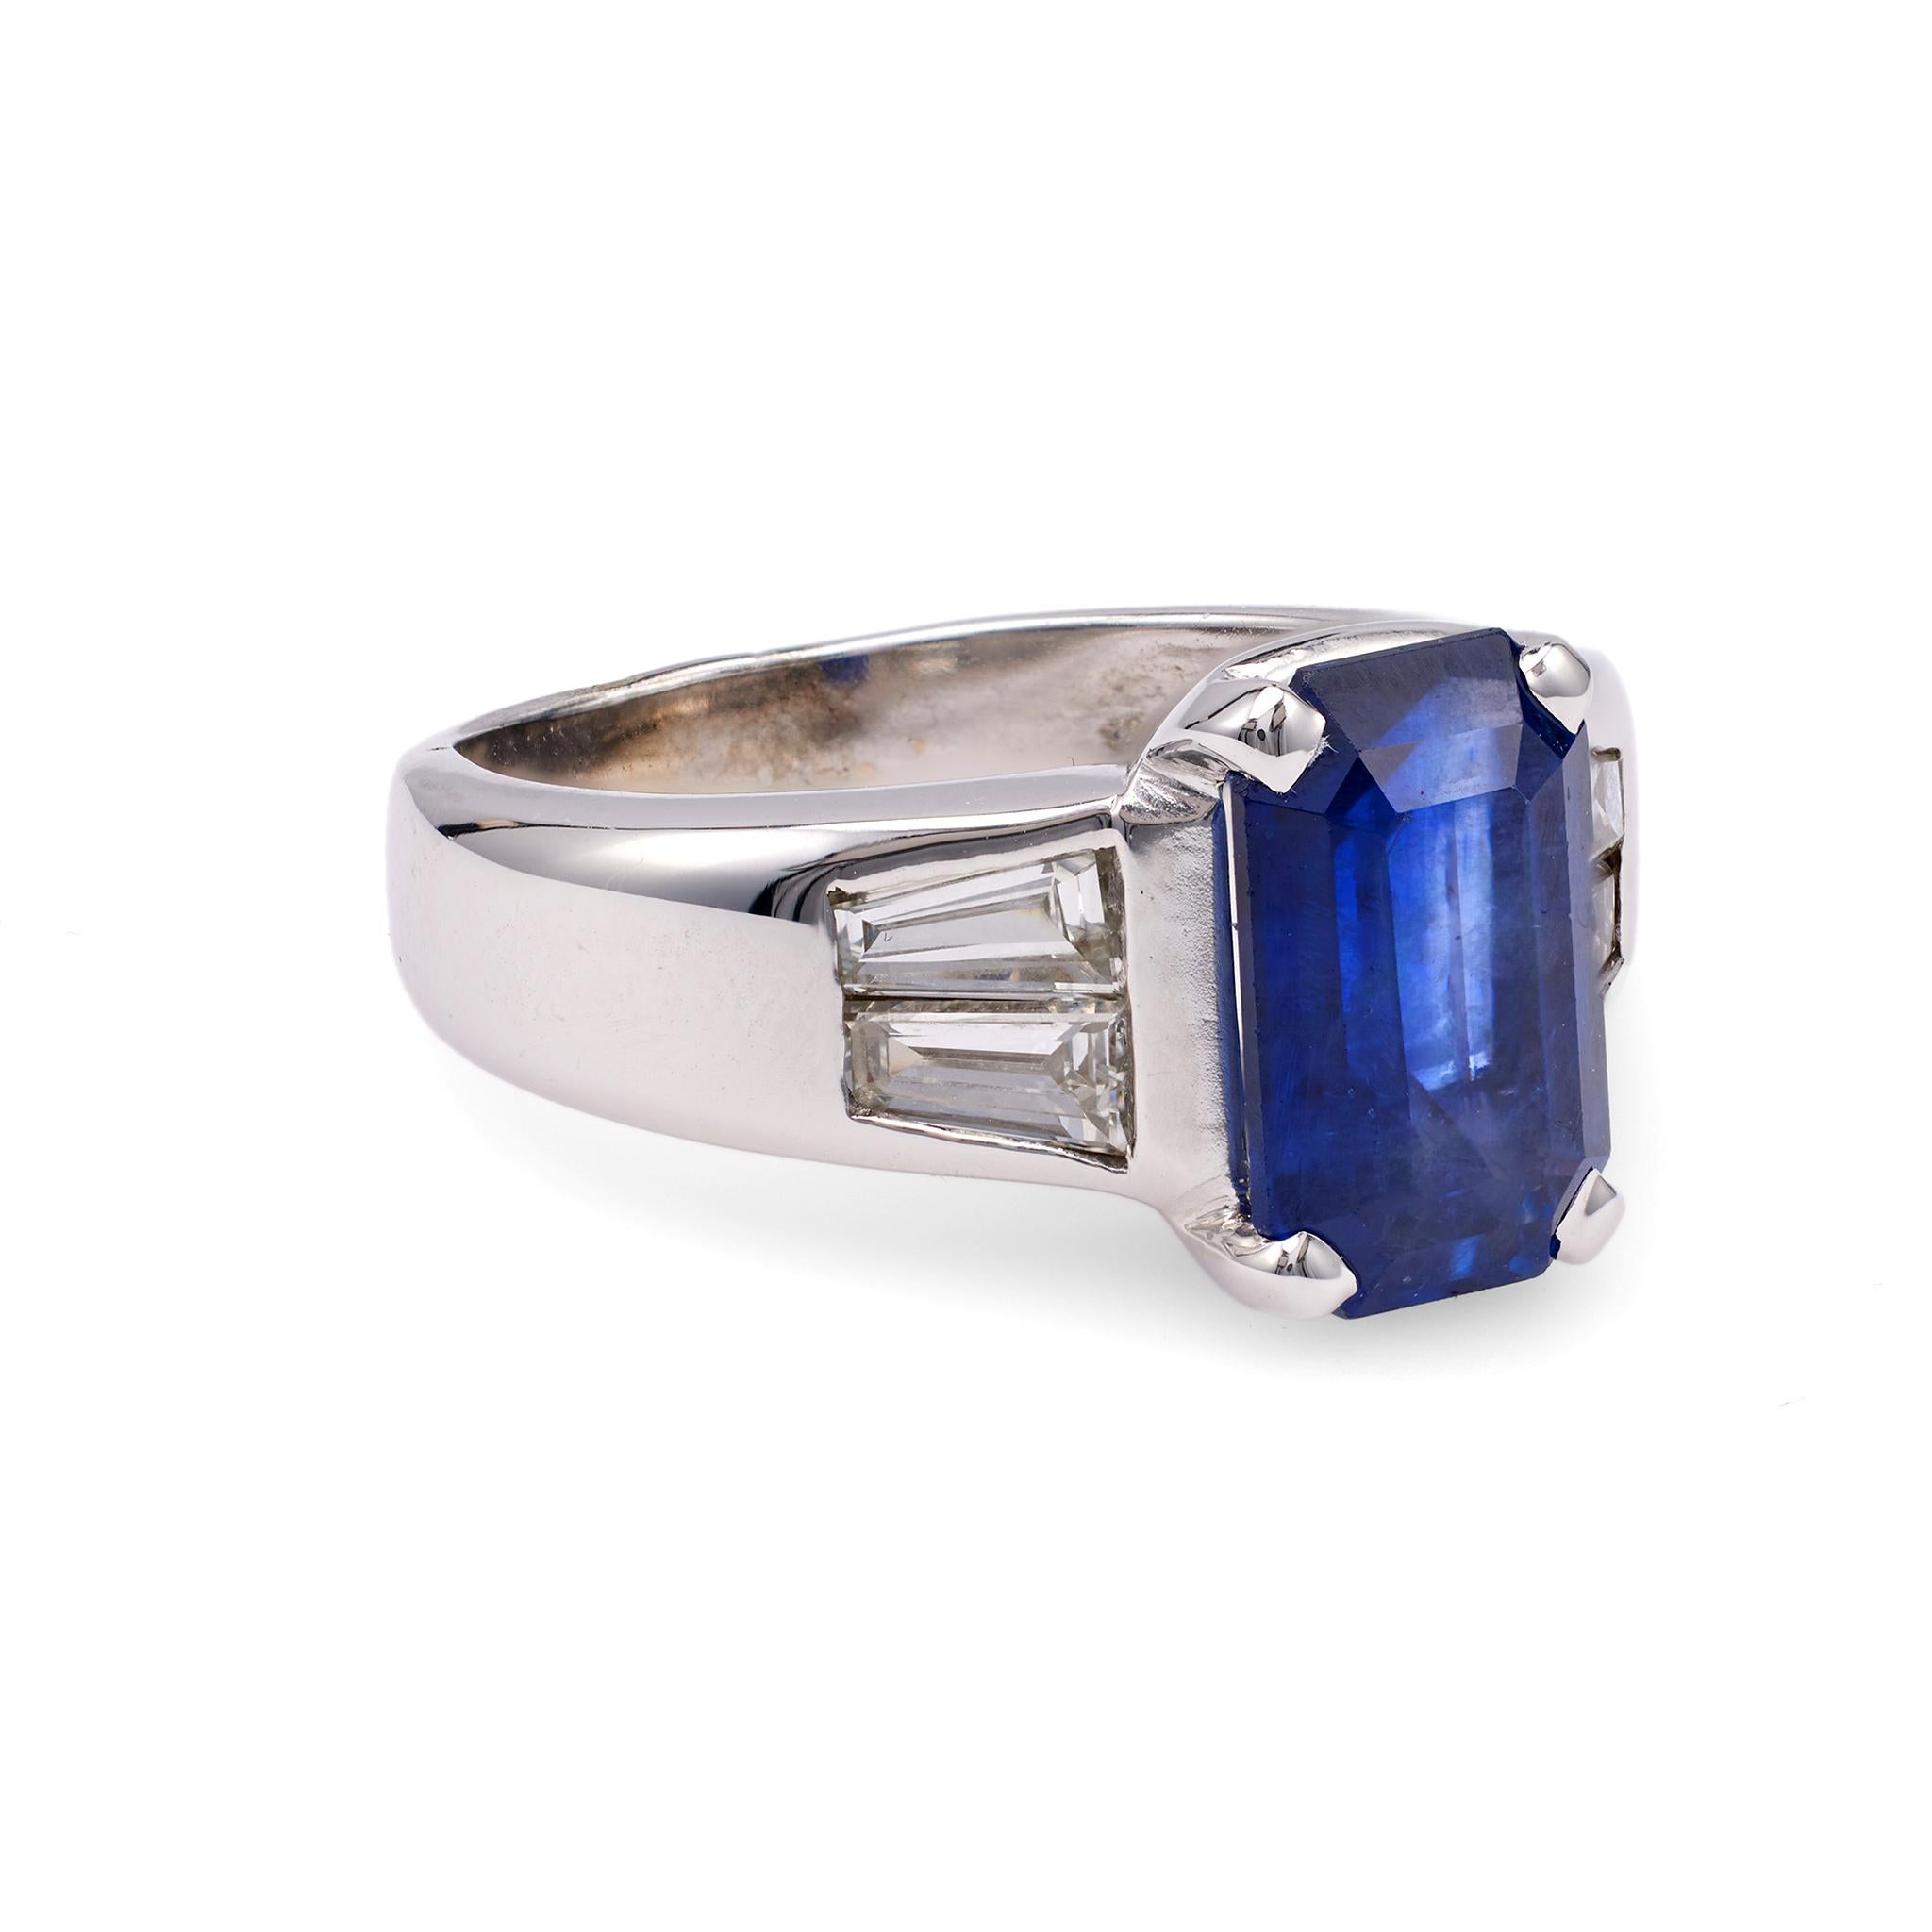 Vintage GIA 4.71 Carat Ceylon Sapphire Diamond 14k White Gold Ring In Good Condition For Sale In Beverly Hills, CA